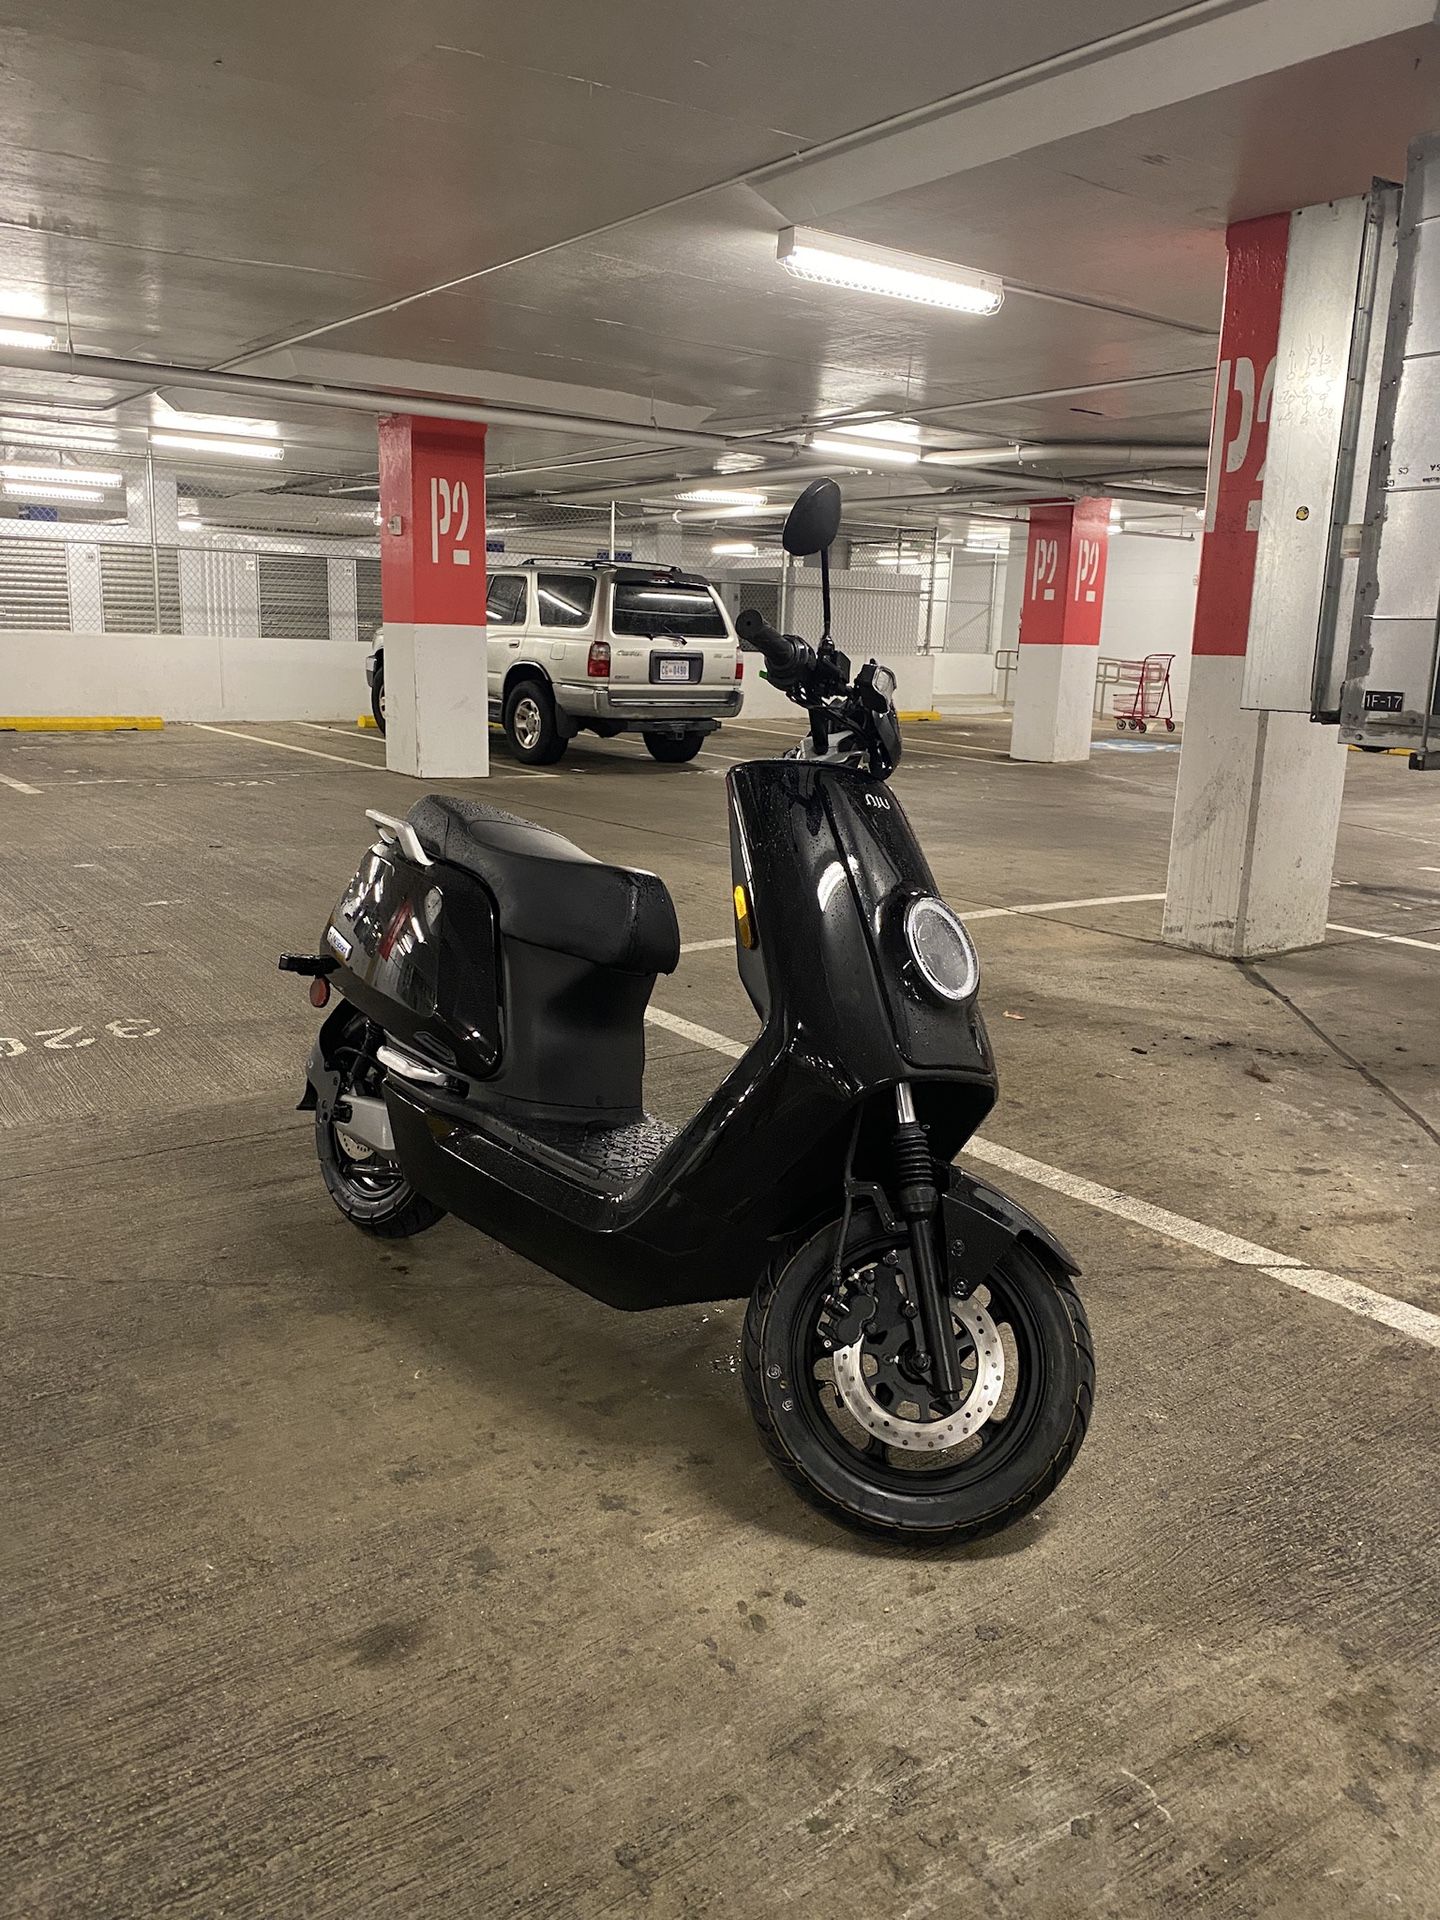 NIU N-Series Electric Scooter (moped vespa style)